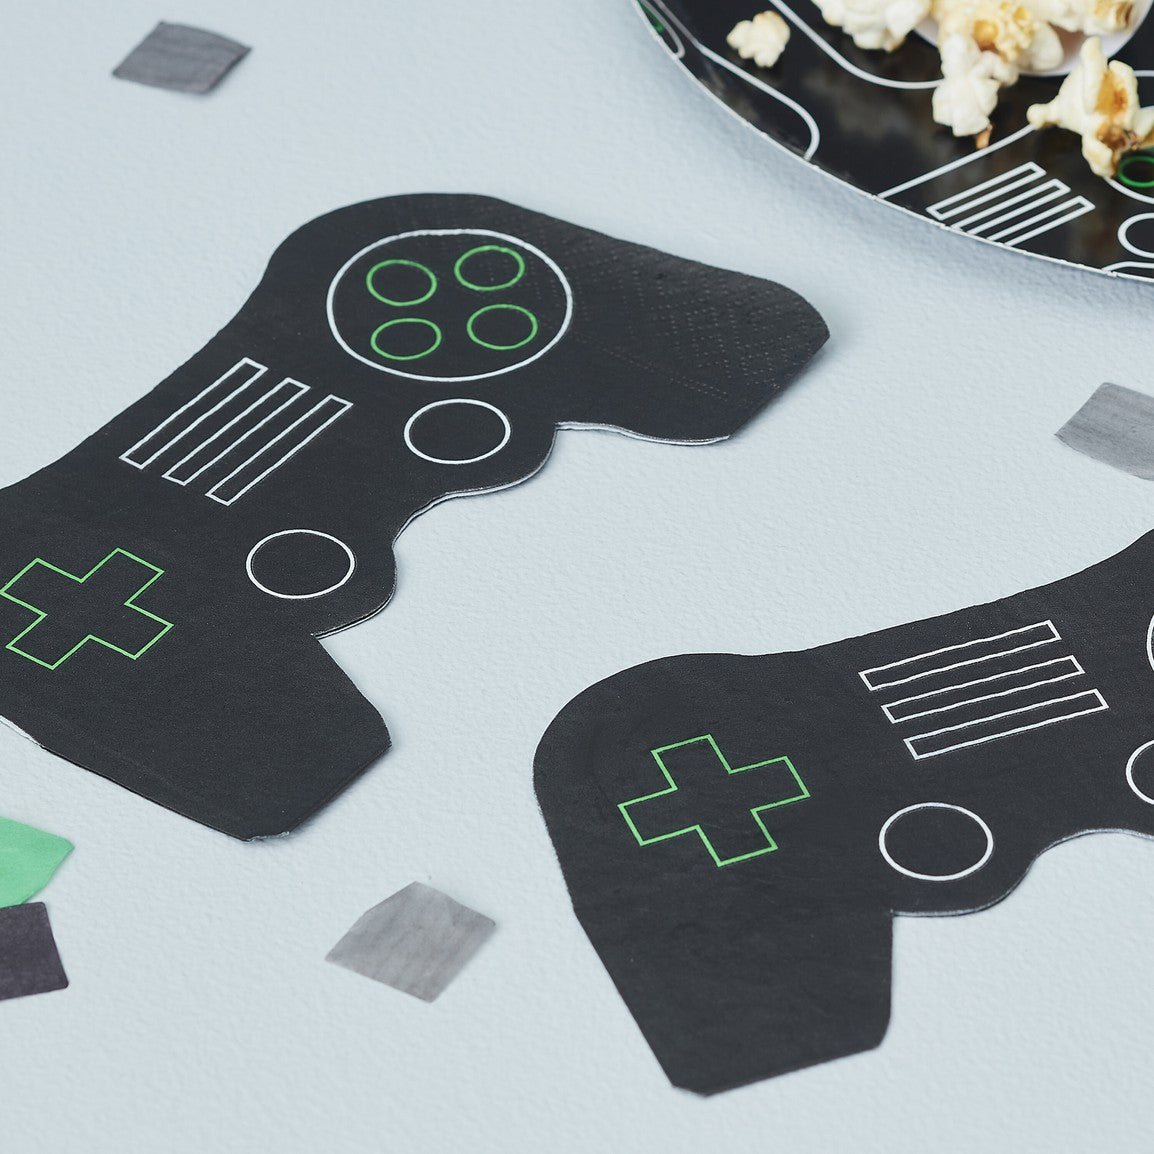 NAPKINS SMALL - BLACK LEVEL UP GAMING CONTROLLER